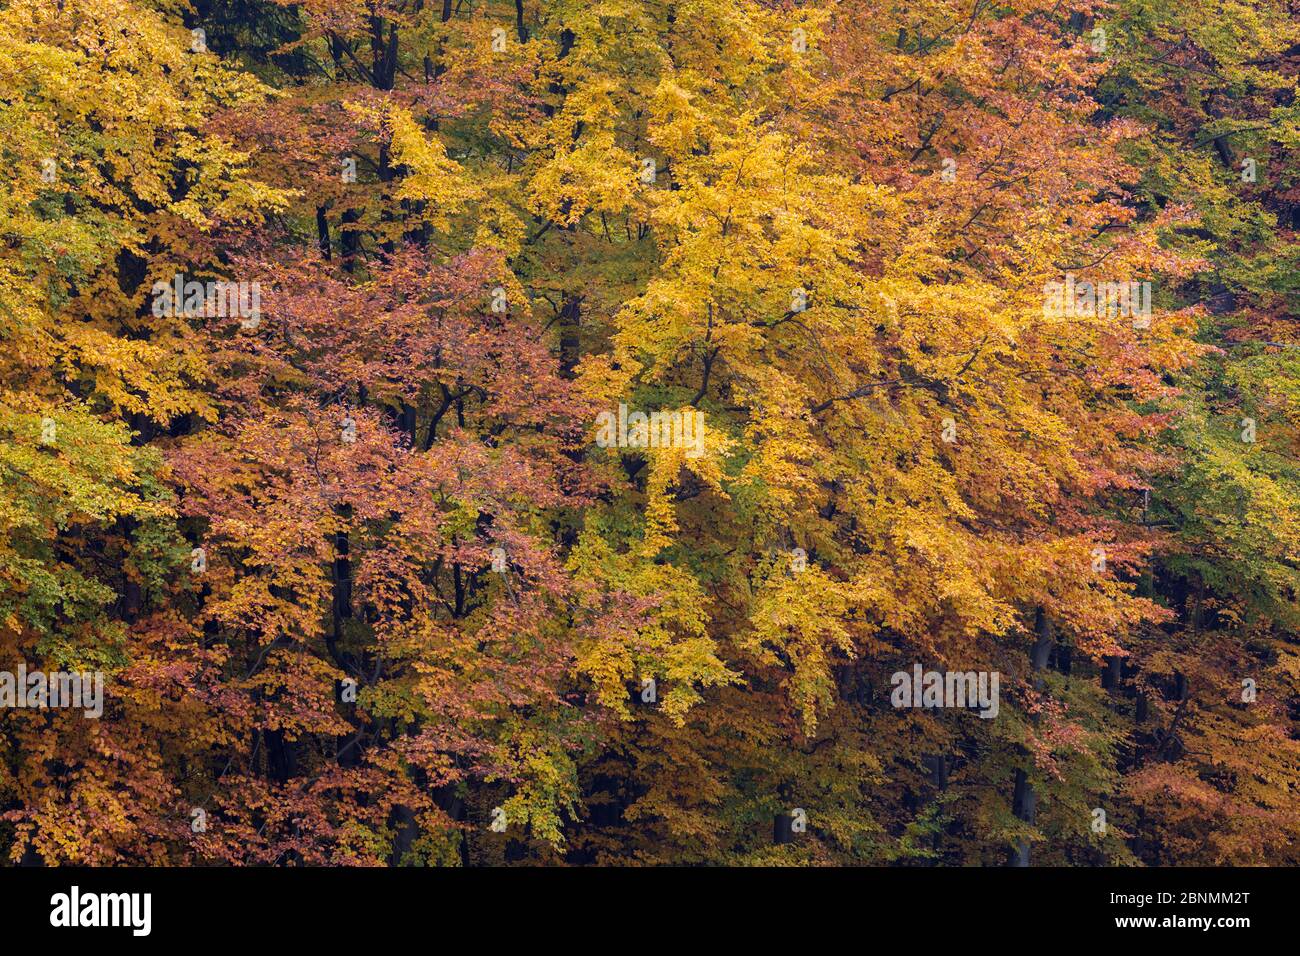 Beech (Fagus sylvatica) forest in autumn colors, Germany, October. Stock Photo